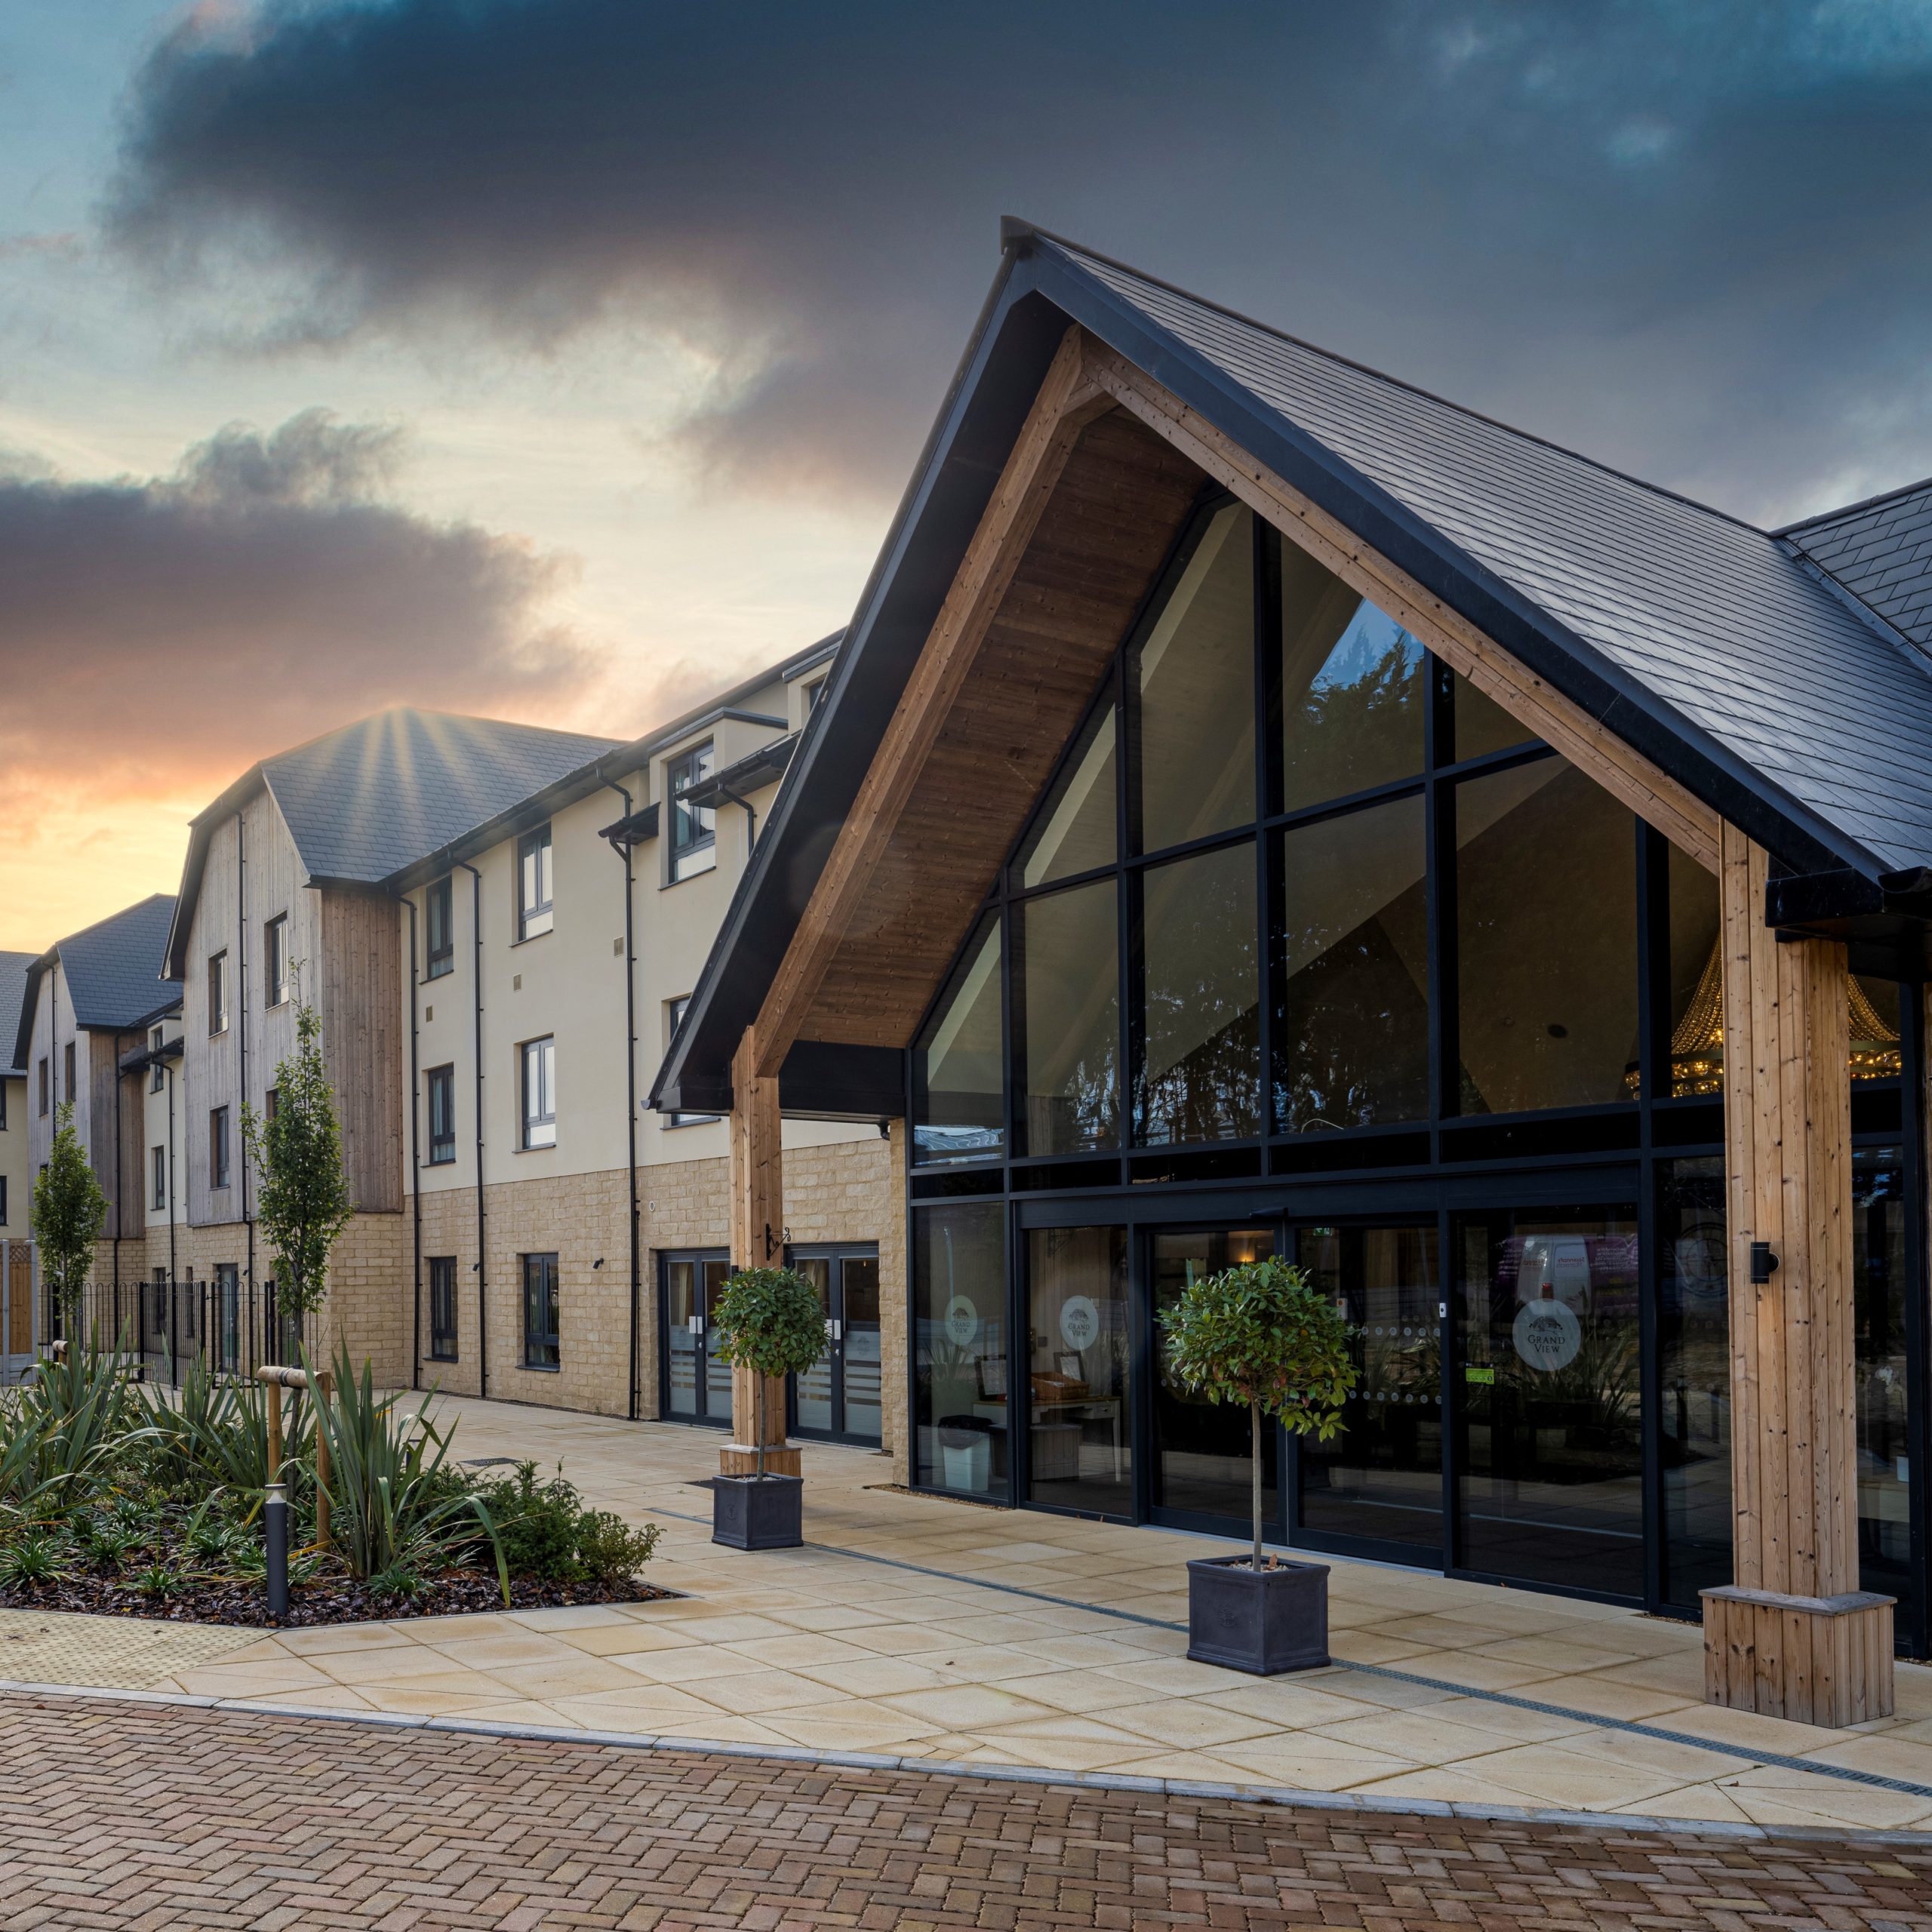 Project – Stamford Care Home